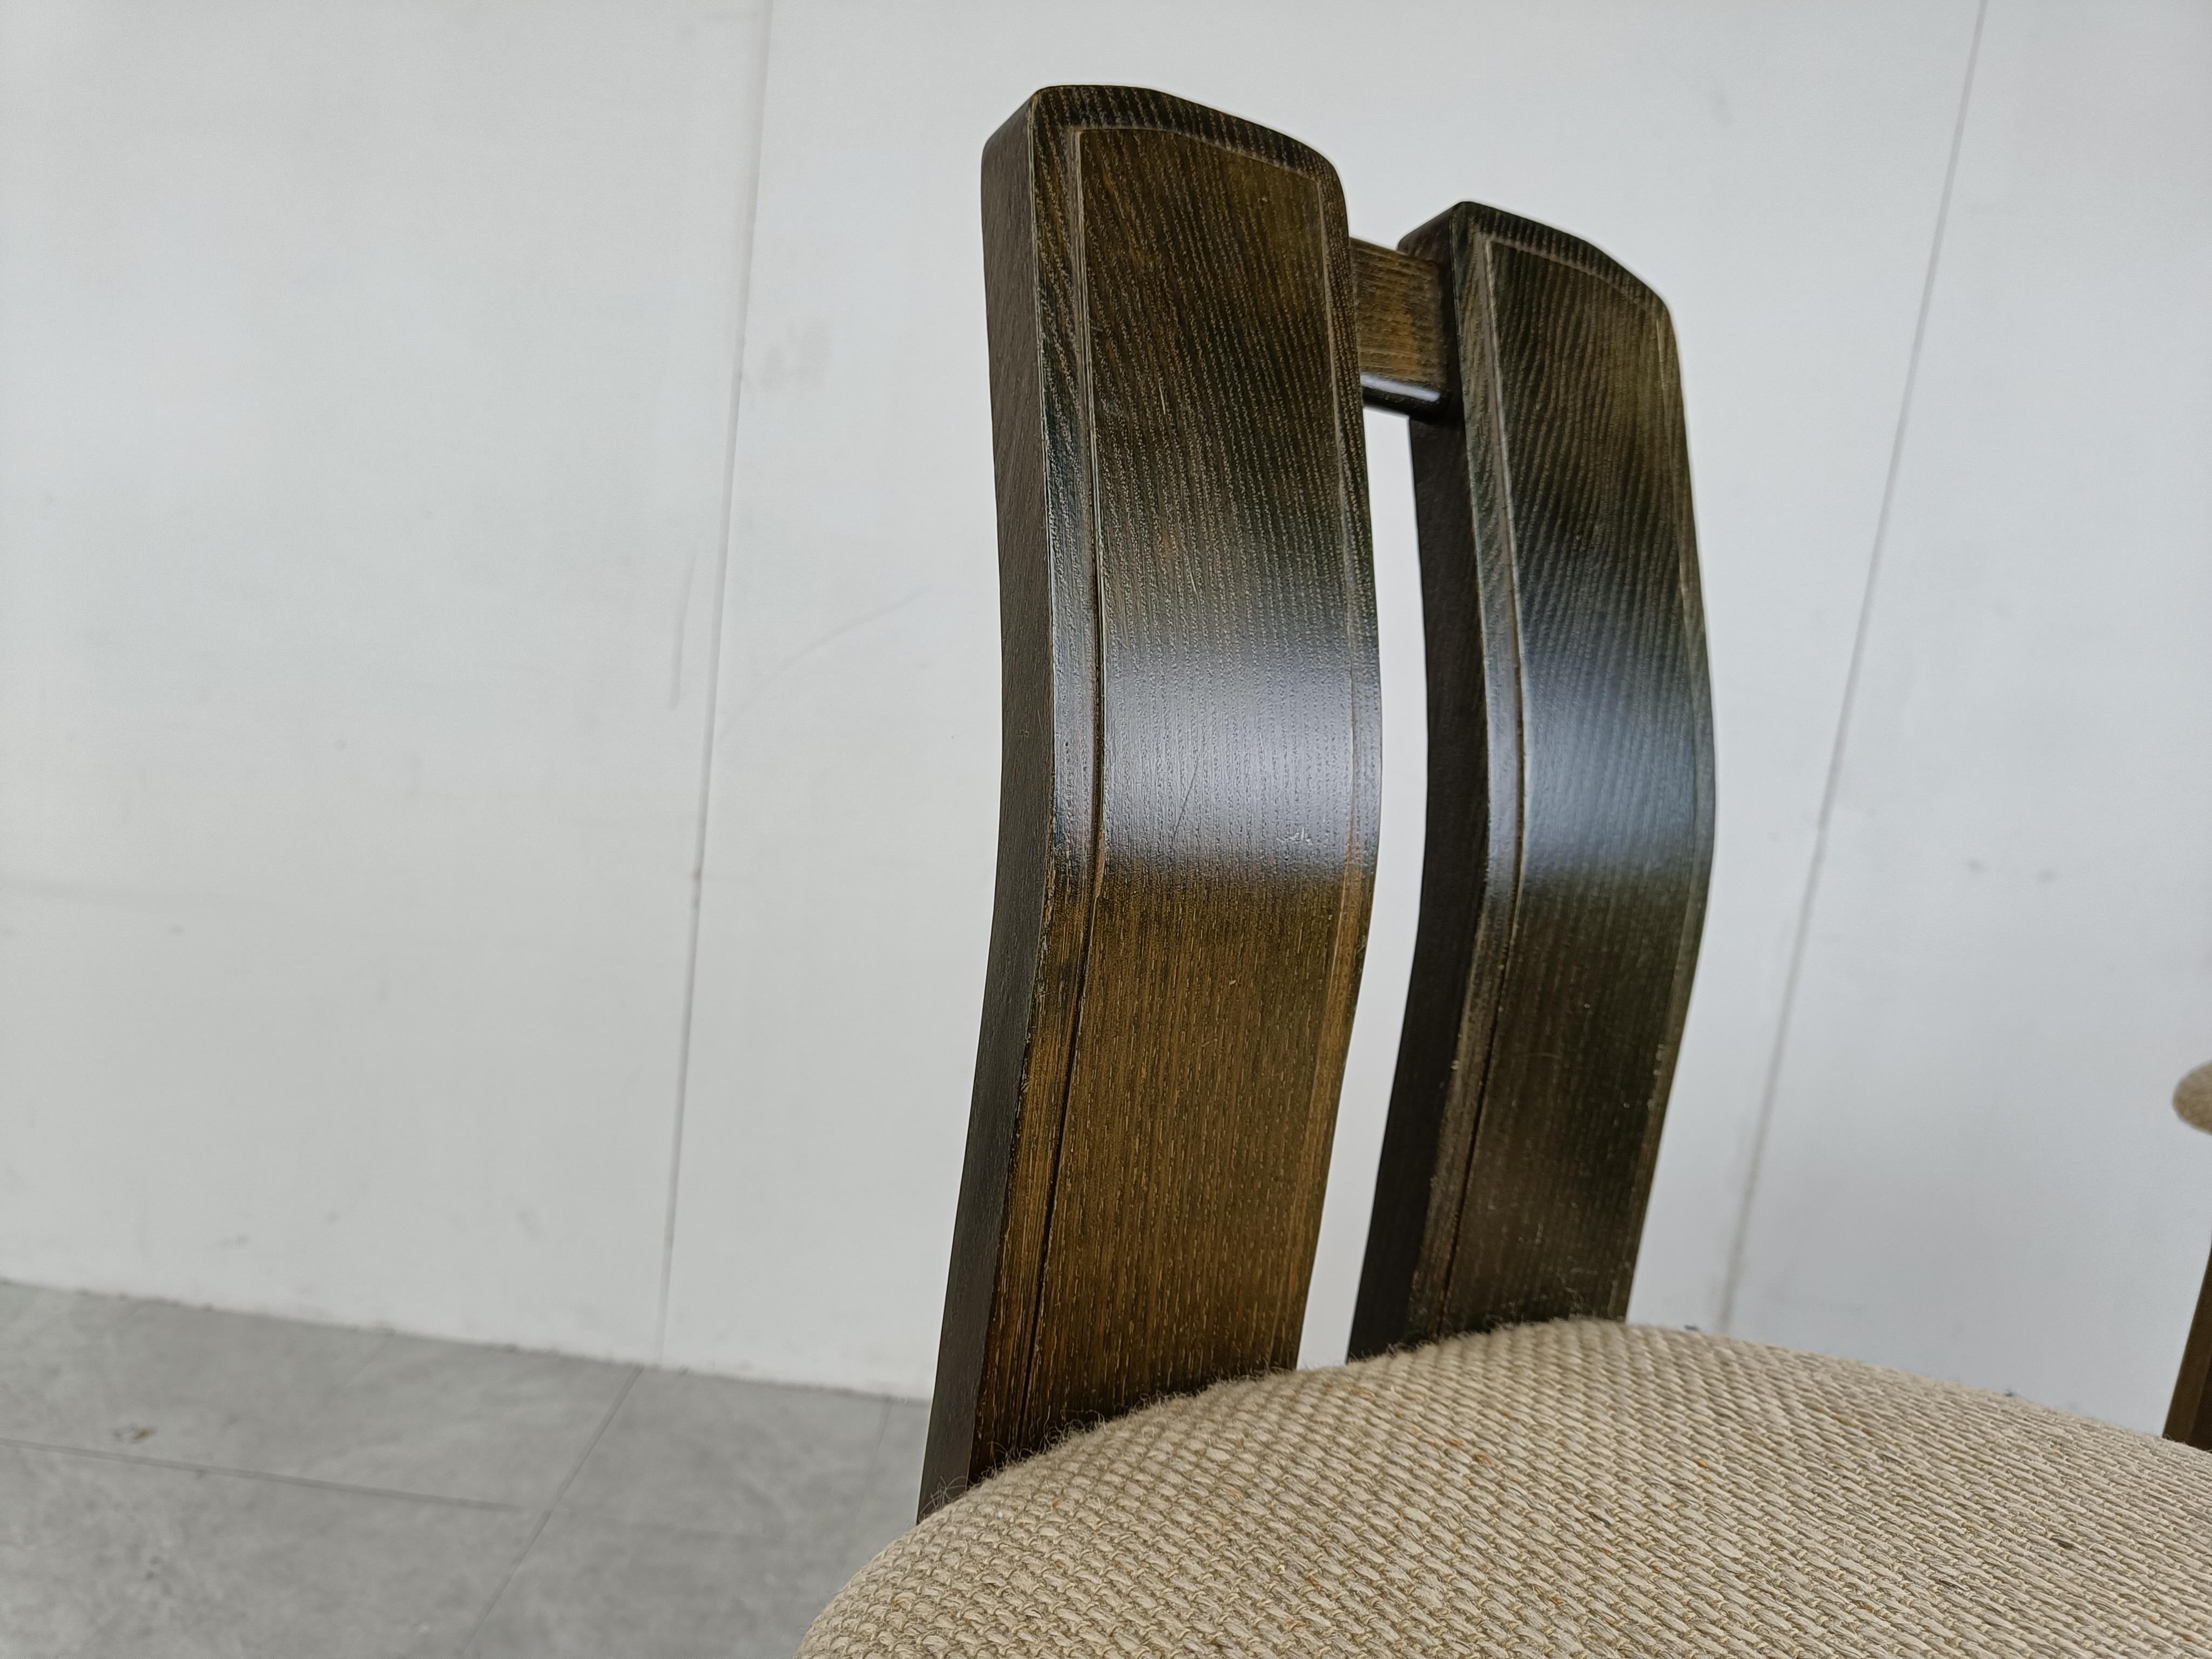 Set of 4 Brutalist style bar stools with bentwood backrests and fabric seats.

The stools have a nice green/brown colour as pictured.

The stools are very sturdy and seat well.

1970s - Germany

Dimensions:
Height: 112cm/44.09